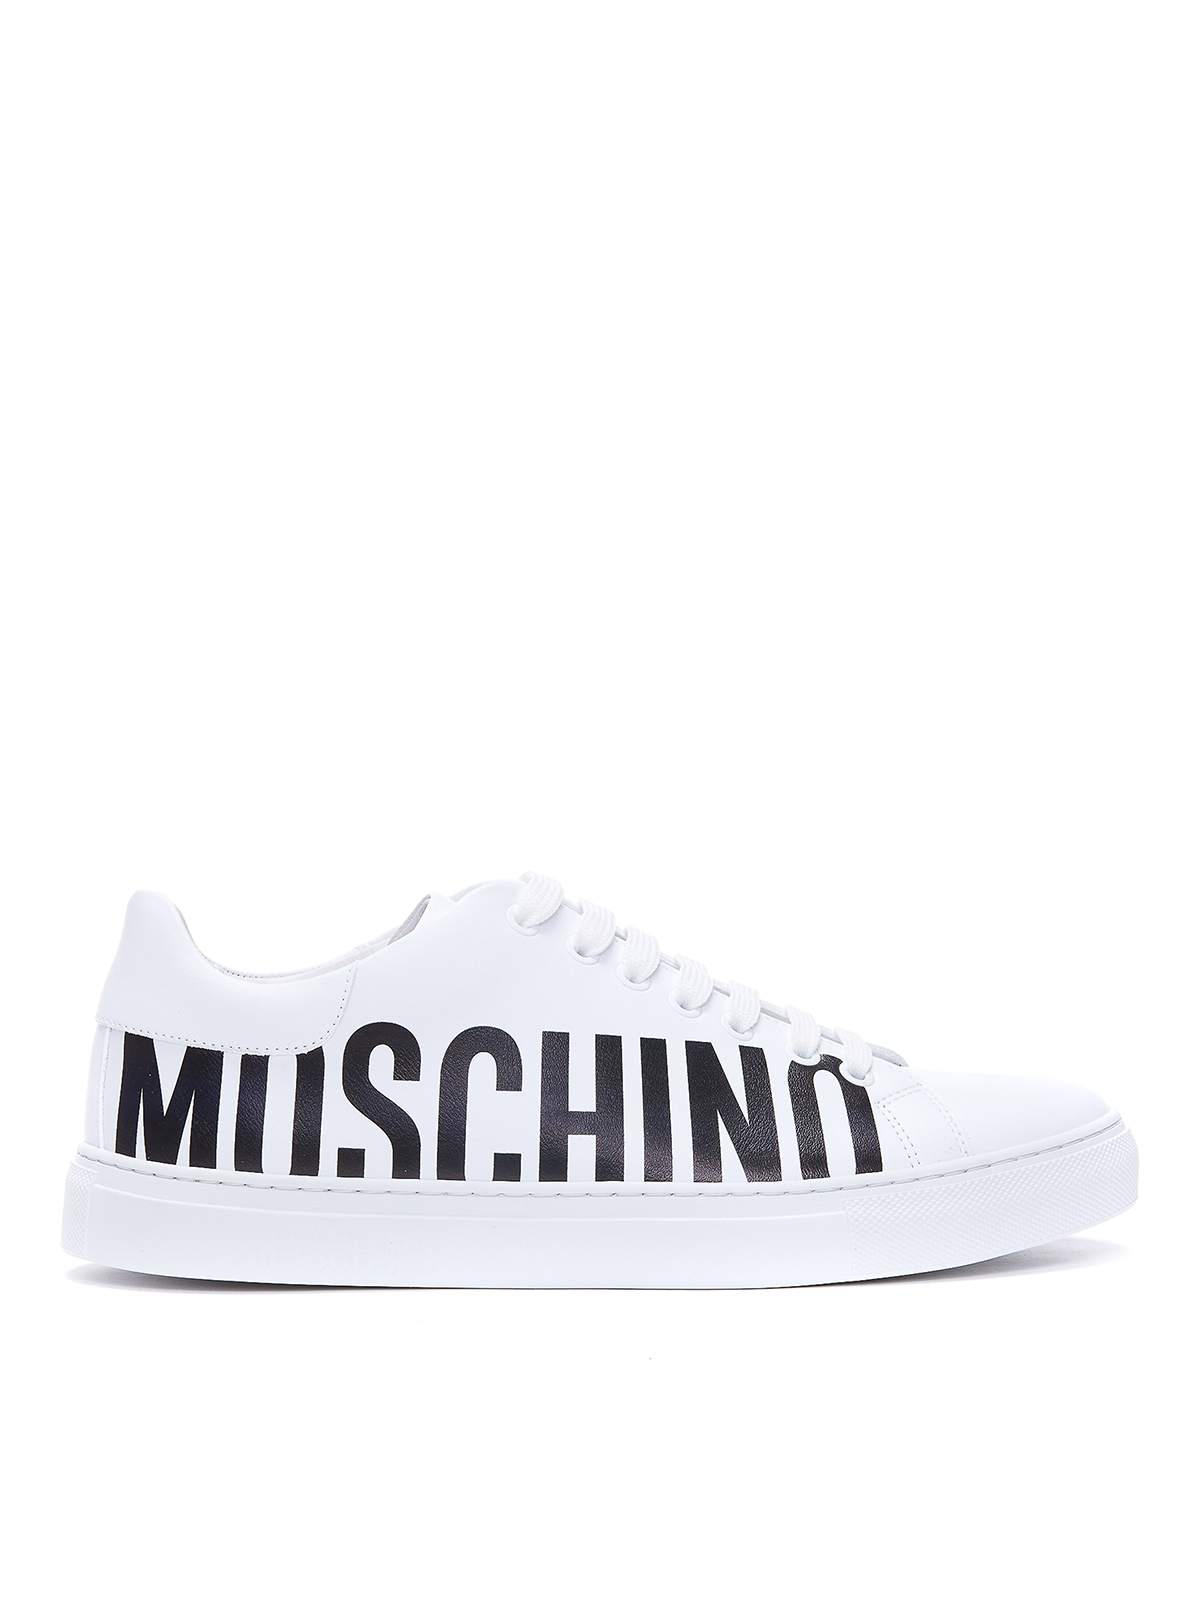 Moschino Leather Sneakers In White